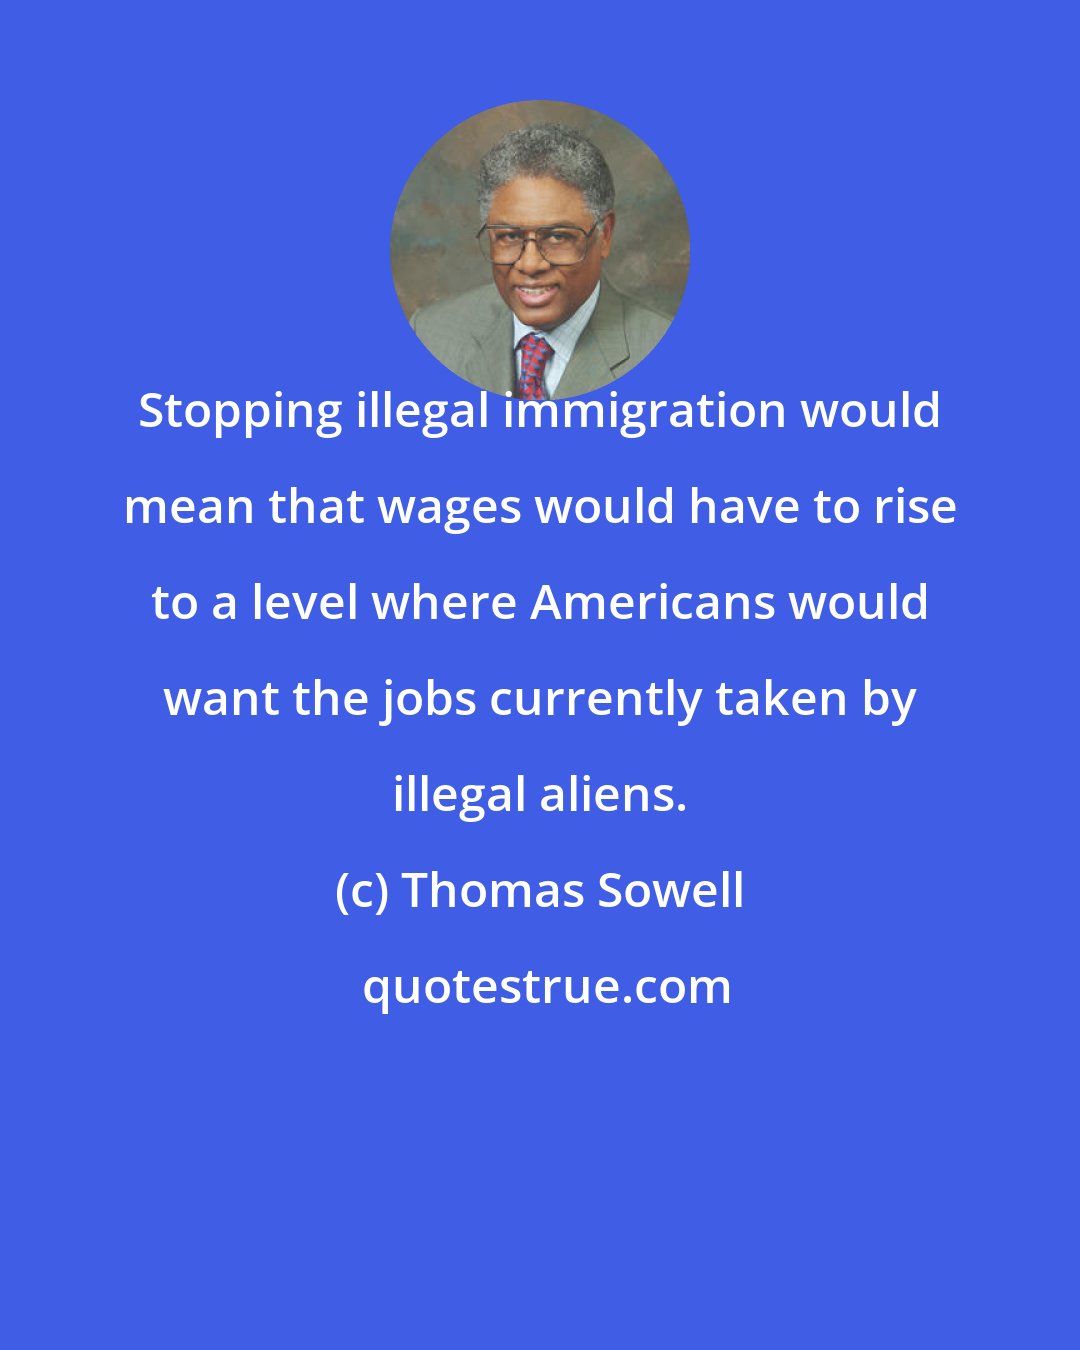 Thomas Sowell: Stopping illegal immigration would mean that wages would have to rise to a level where Americans would want the jobs currently taken by illegal aliens.